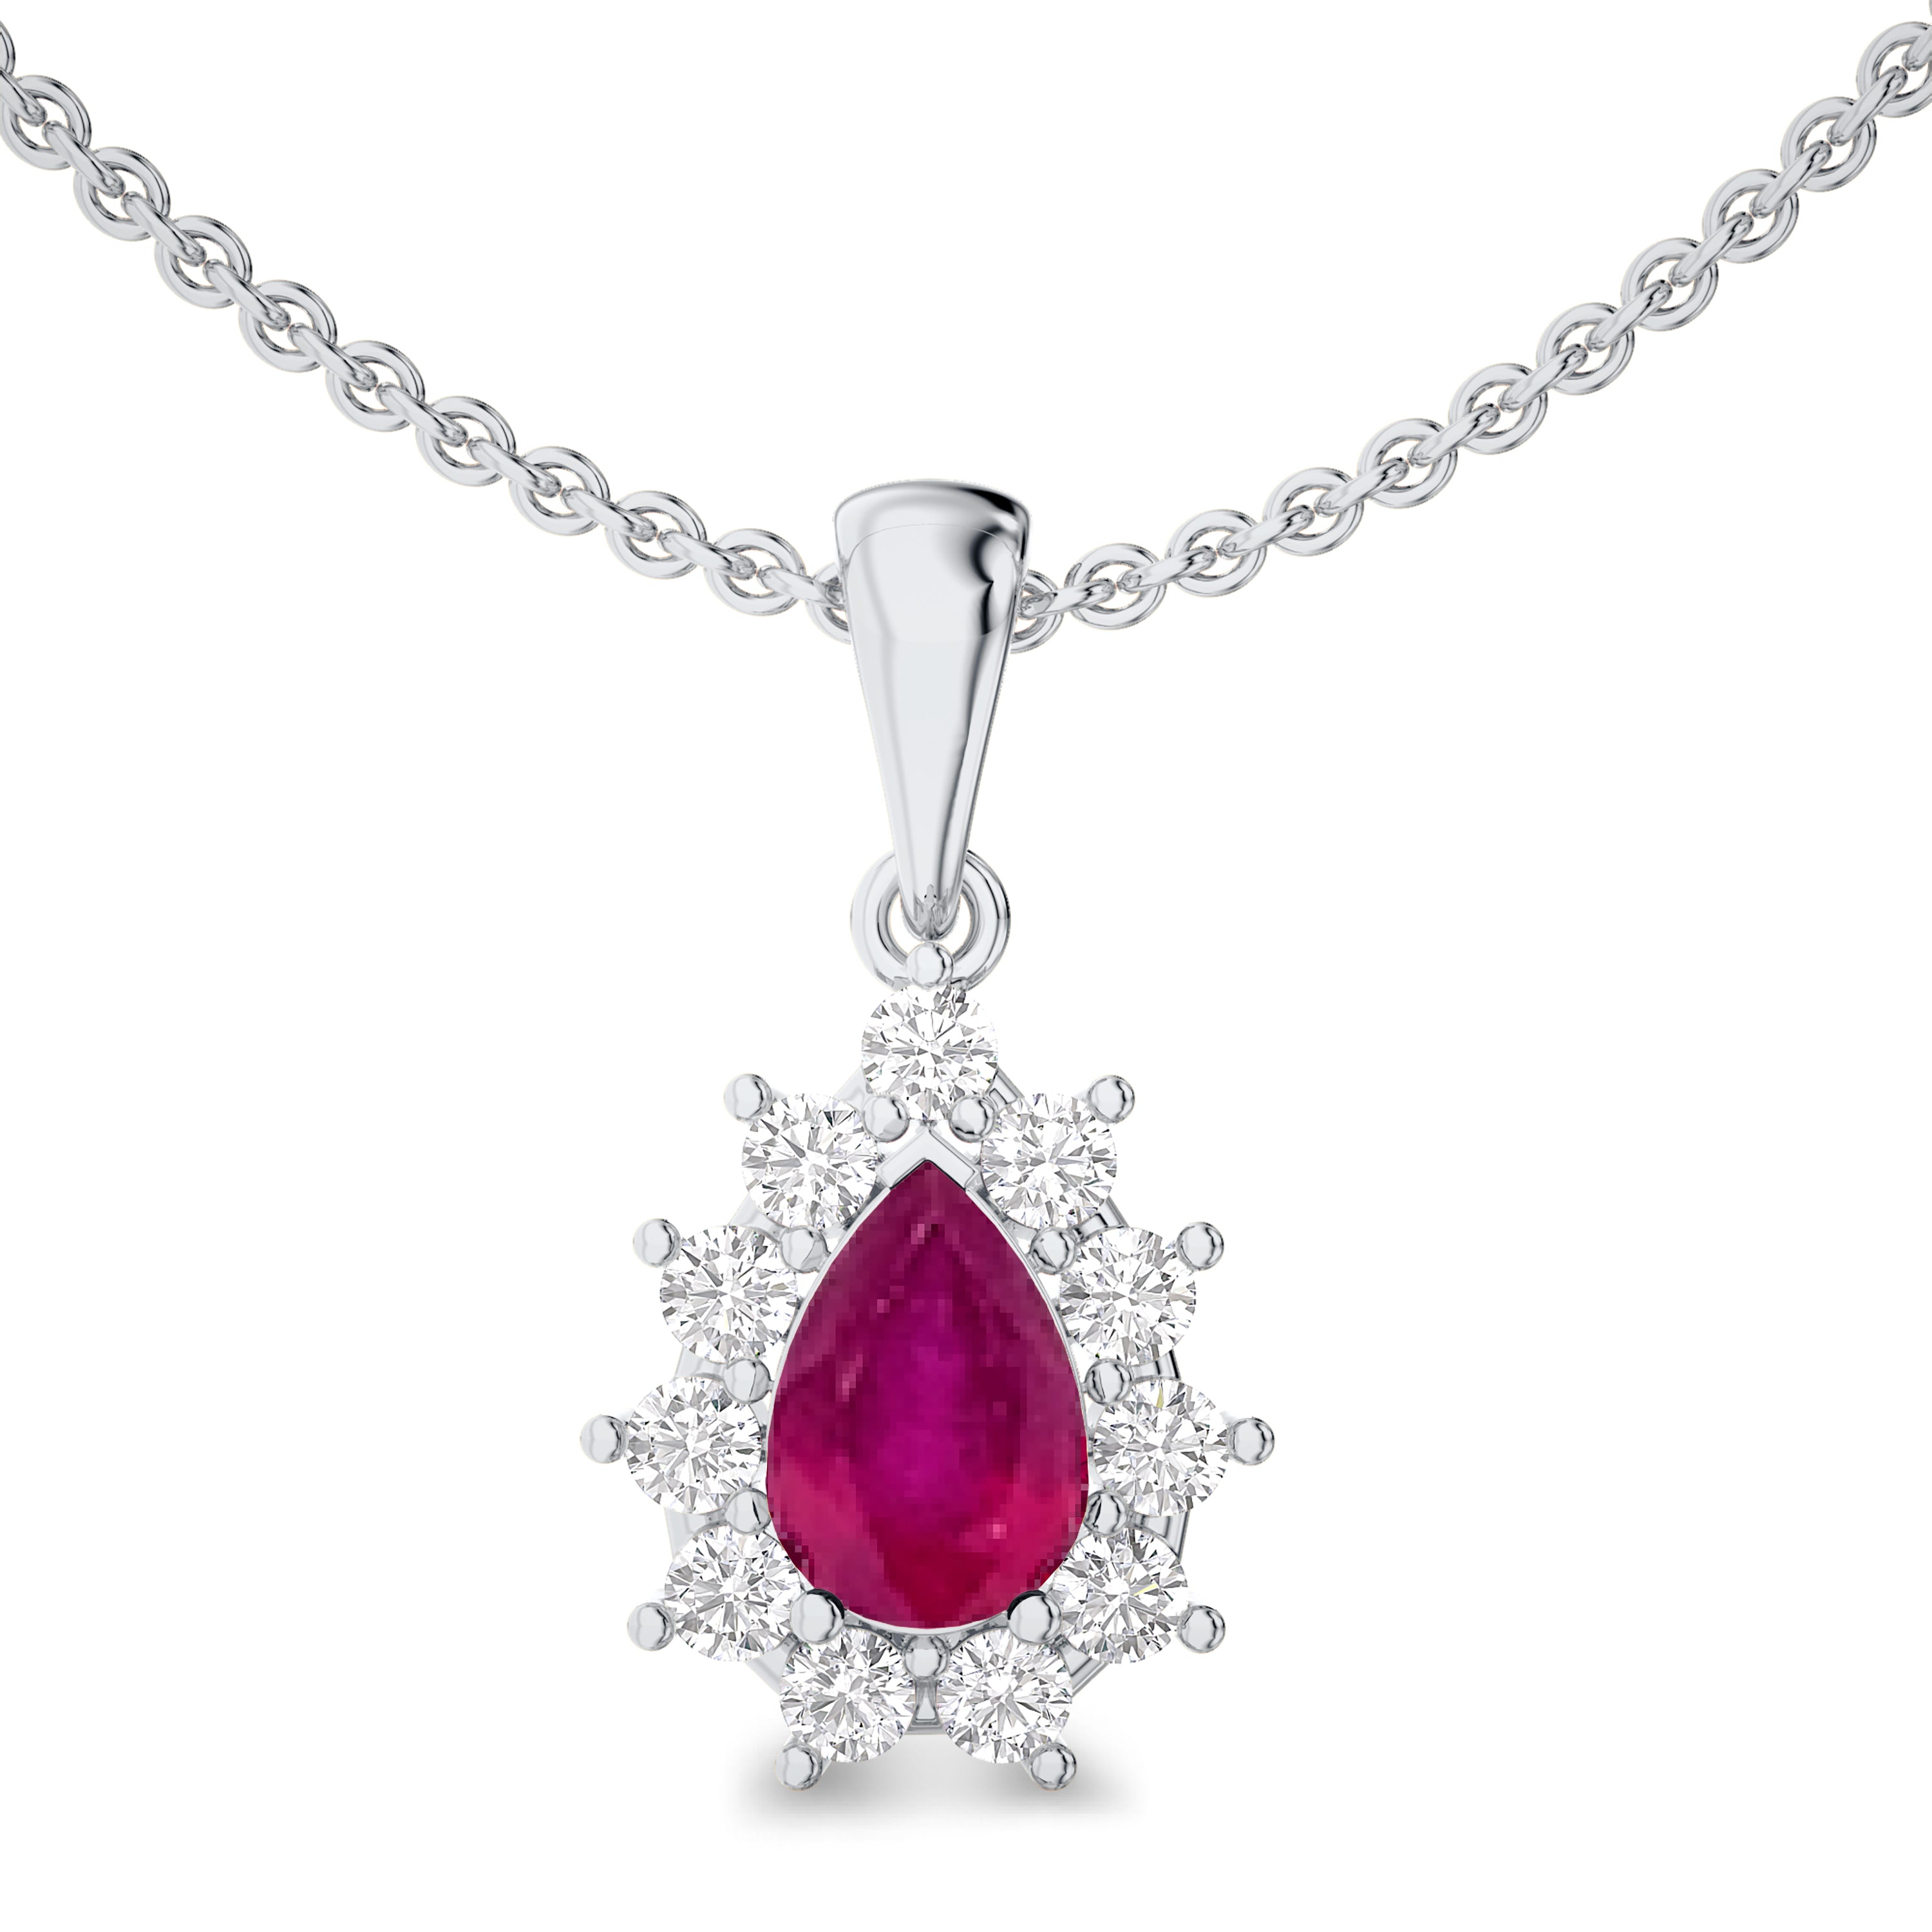 diamond and pear cut ruby necklace in 18k white gold, FG color, SI clarity, diamonds in 0.22 carat and ruby in 0.52 carat